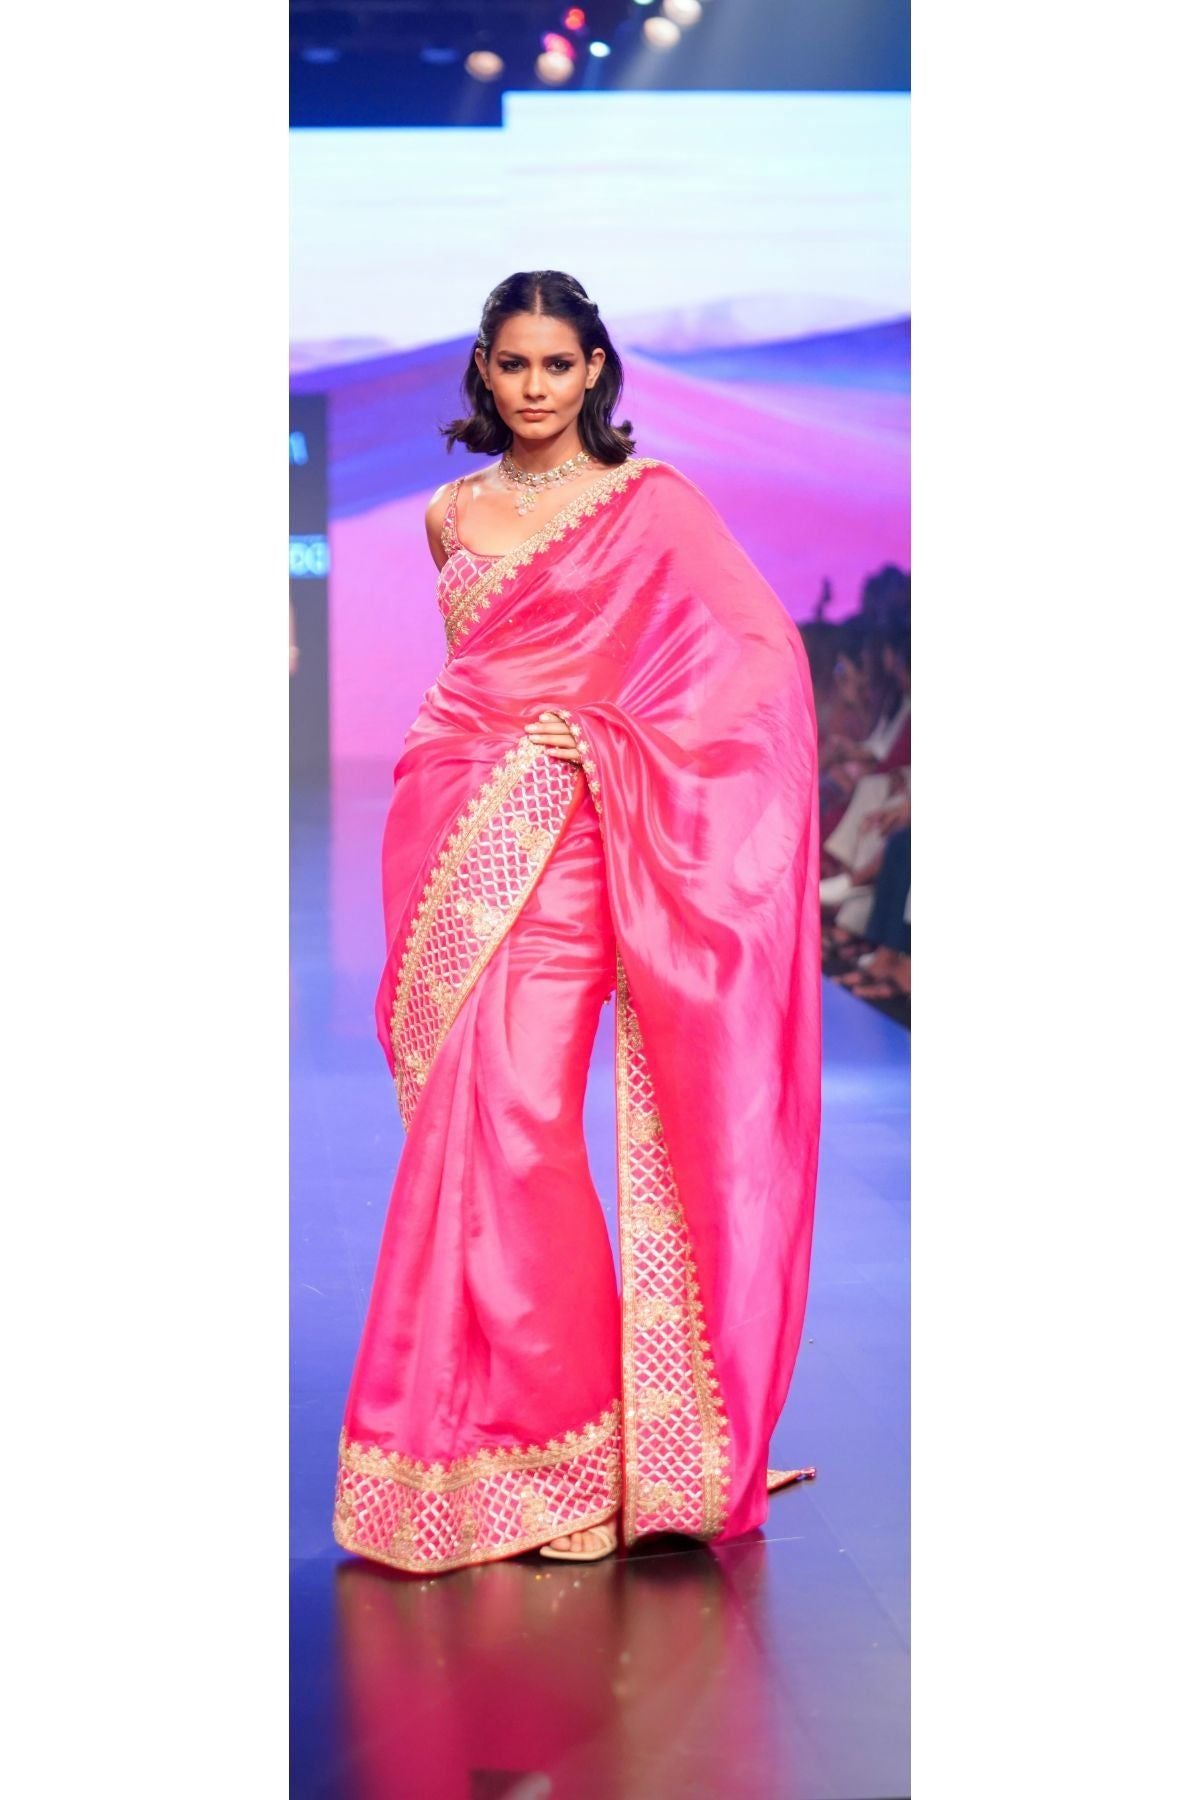 Gulaabi Gulaal Saree Hand Embroidered Saree Paired With heavy Blouse